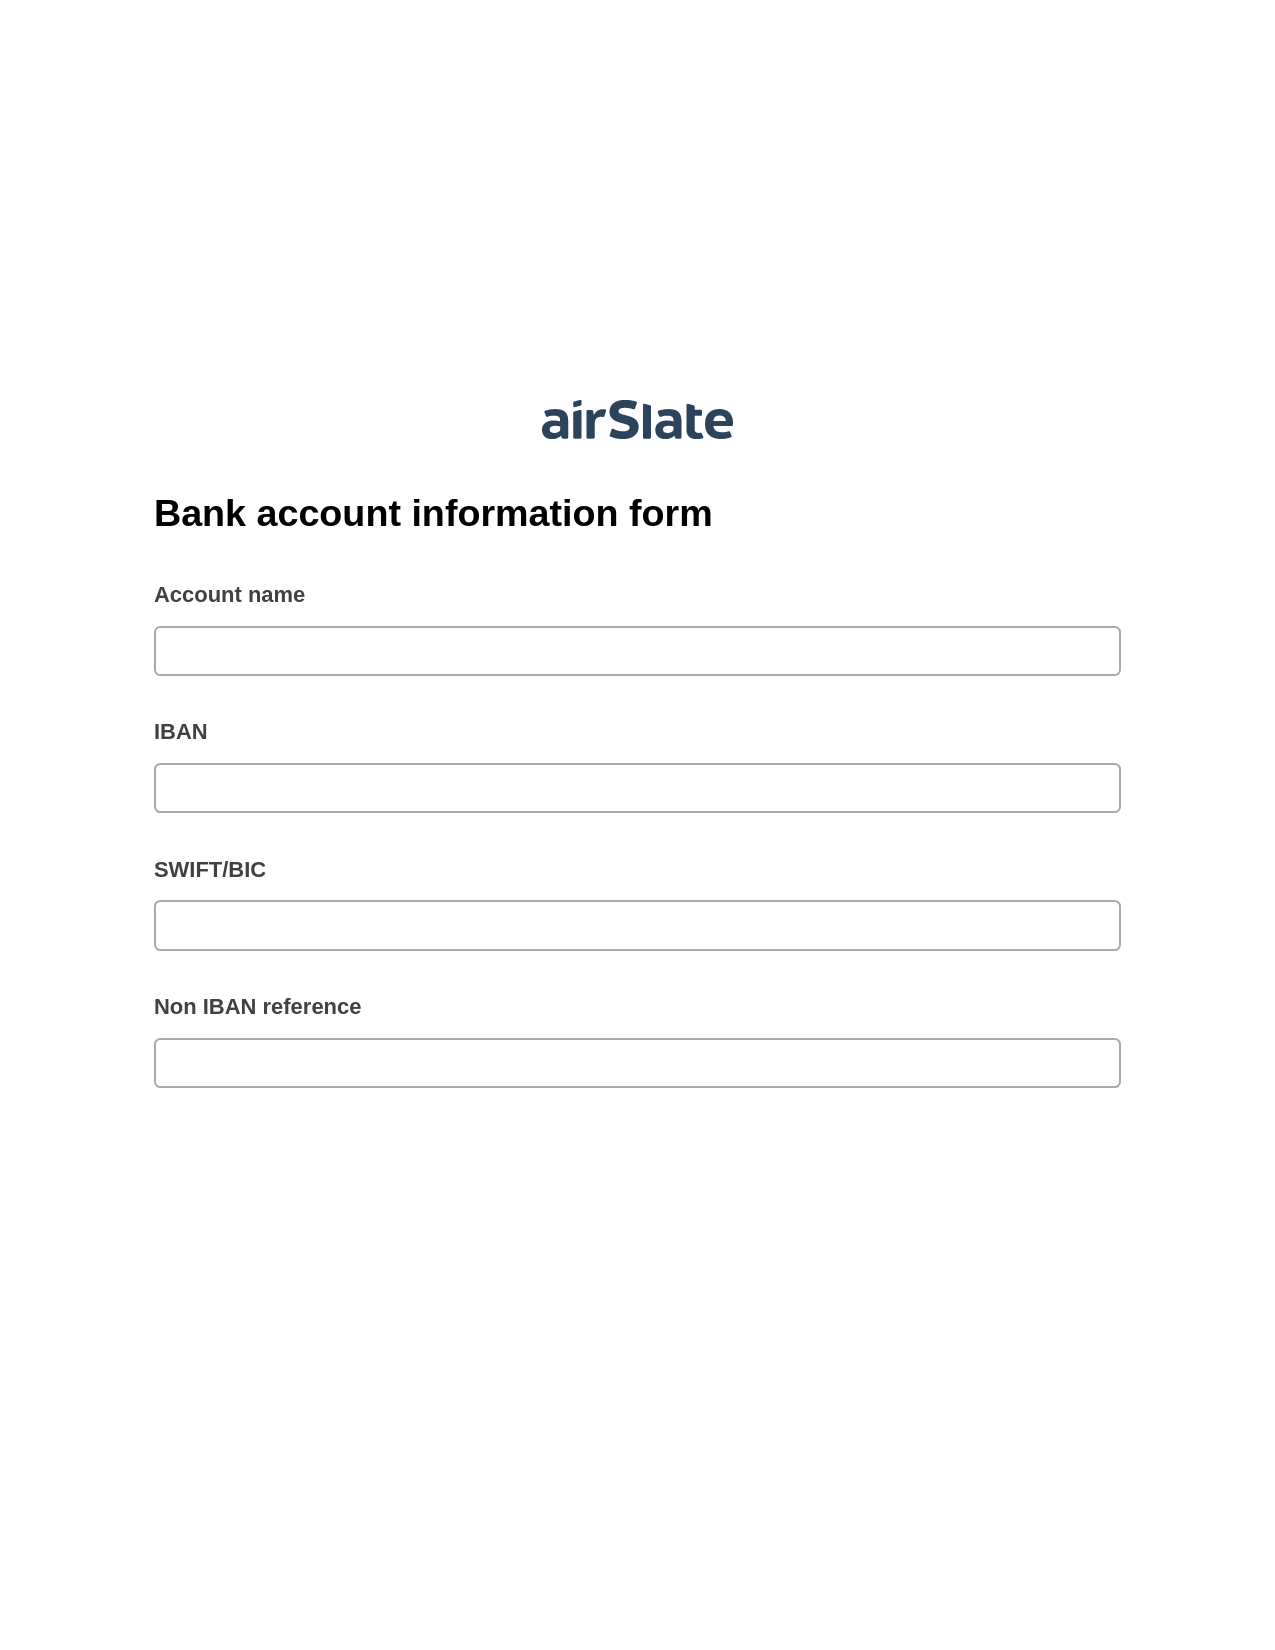 Multirole Bank account information form Pre-fill Slate from MS Dynamics 365 Records Bot, Create Slate every Google Sheet Update Bot, Export to Google Sheet Bot